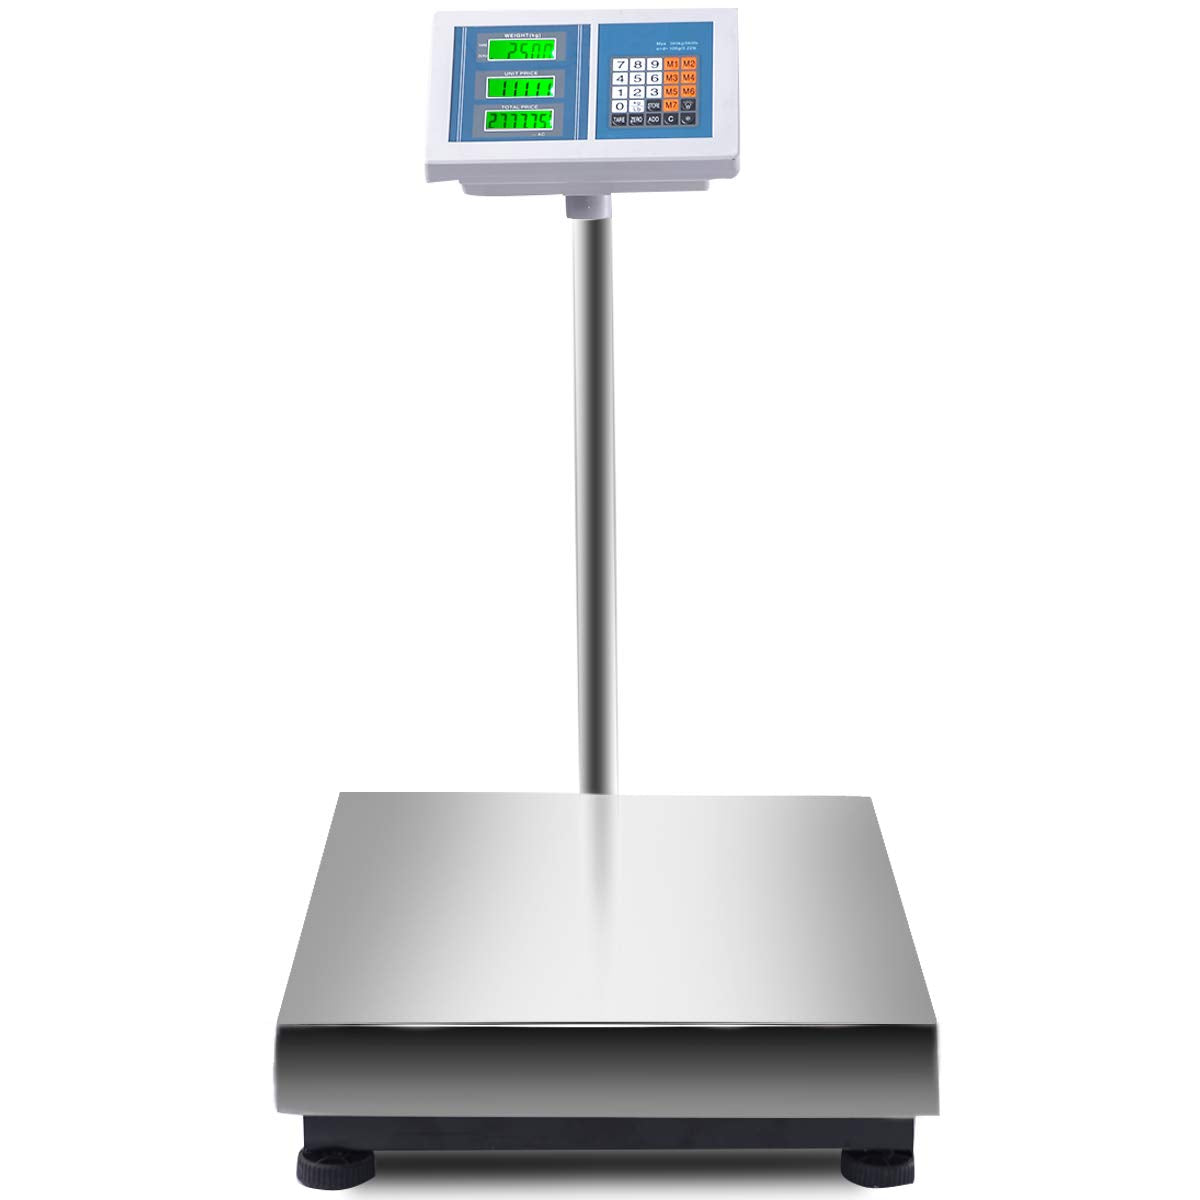 Giantex 660lbs Weight Computing Digital Scale Floor Platform Scale Postal Scale Accurate Shipping Mailing LB/KG Price Calculator, Silver - Giantexus